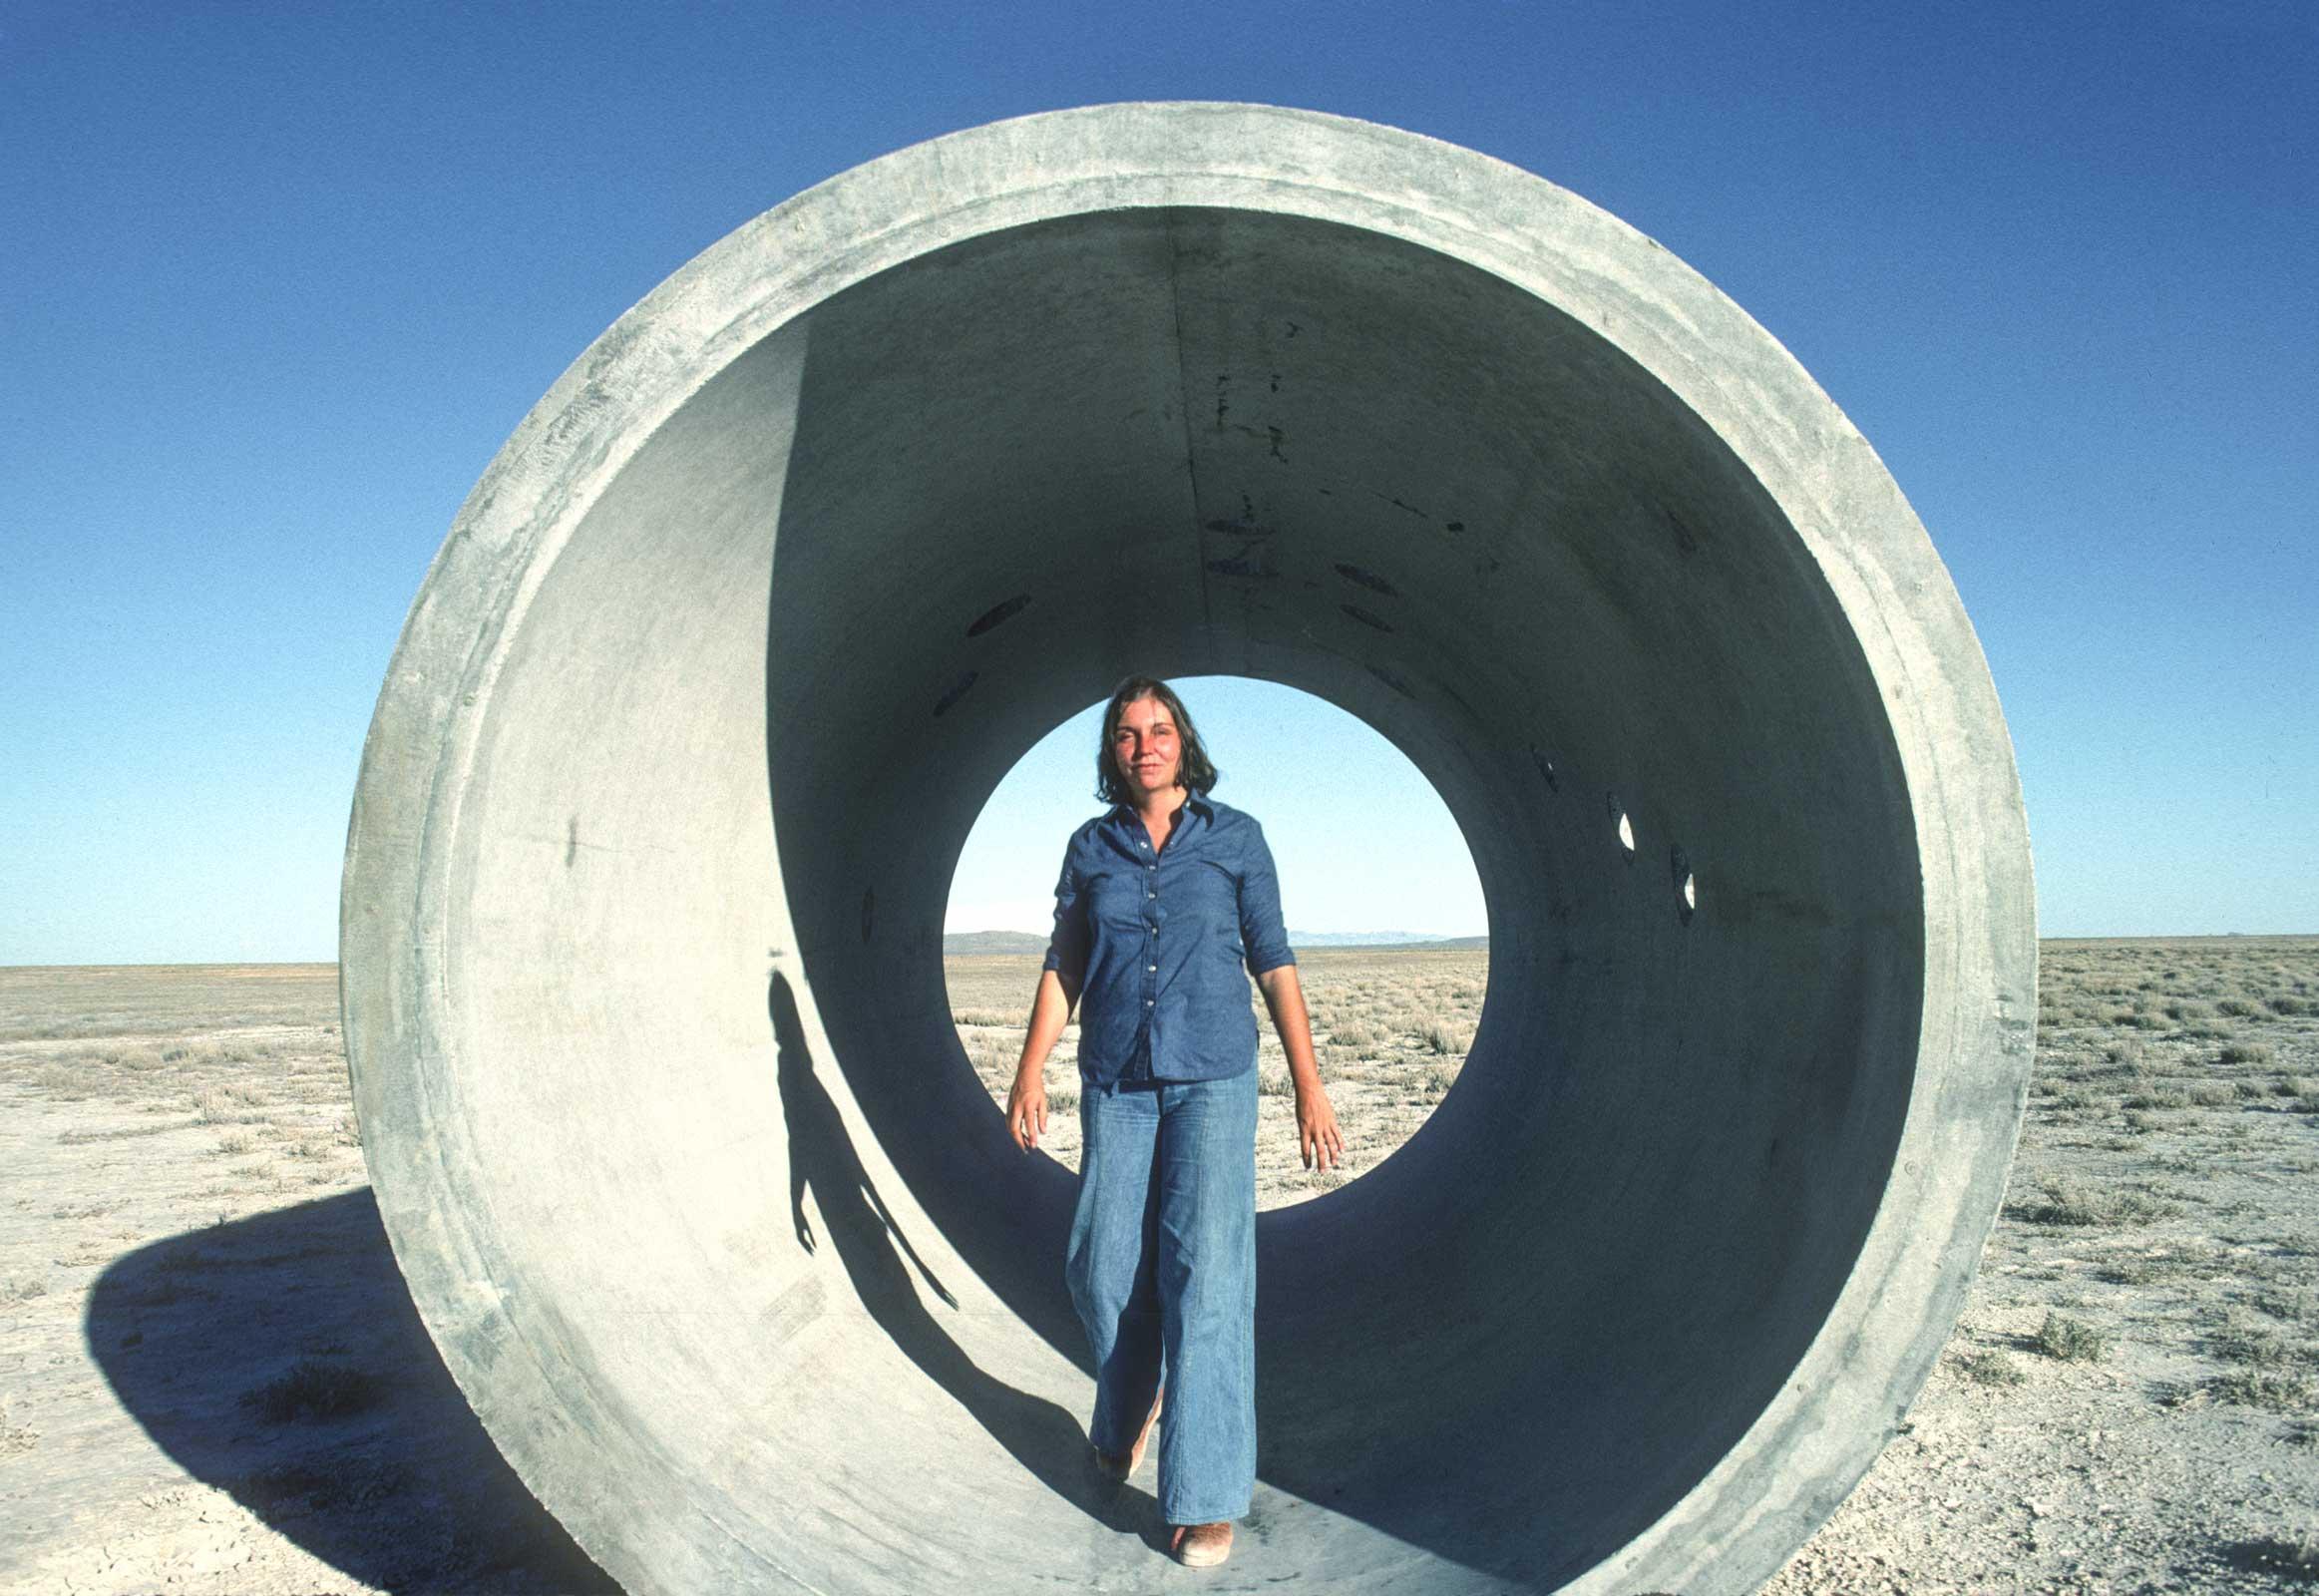 Nancy Holt standing inside one of the large tunnels that are part of Sun Tunnels.  Blue sky and sunny and Nancy is wearing a blue top and blue jeans.